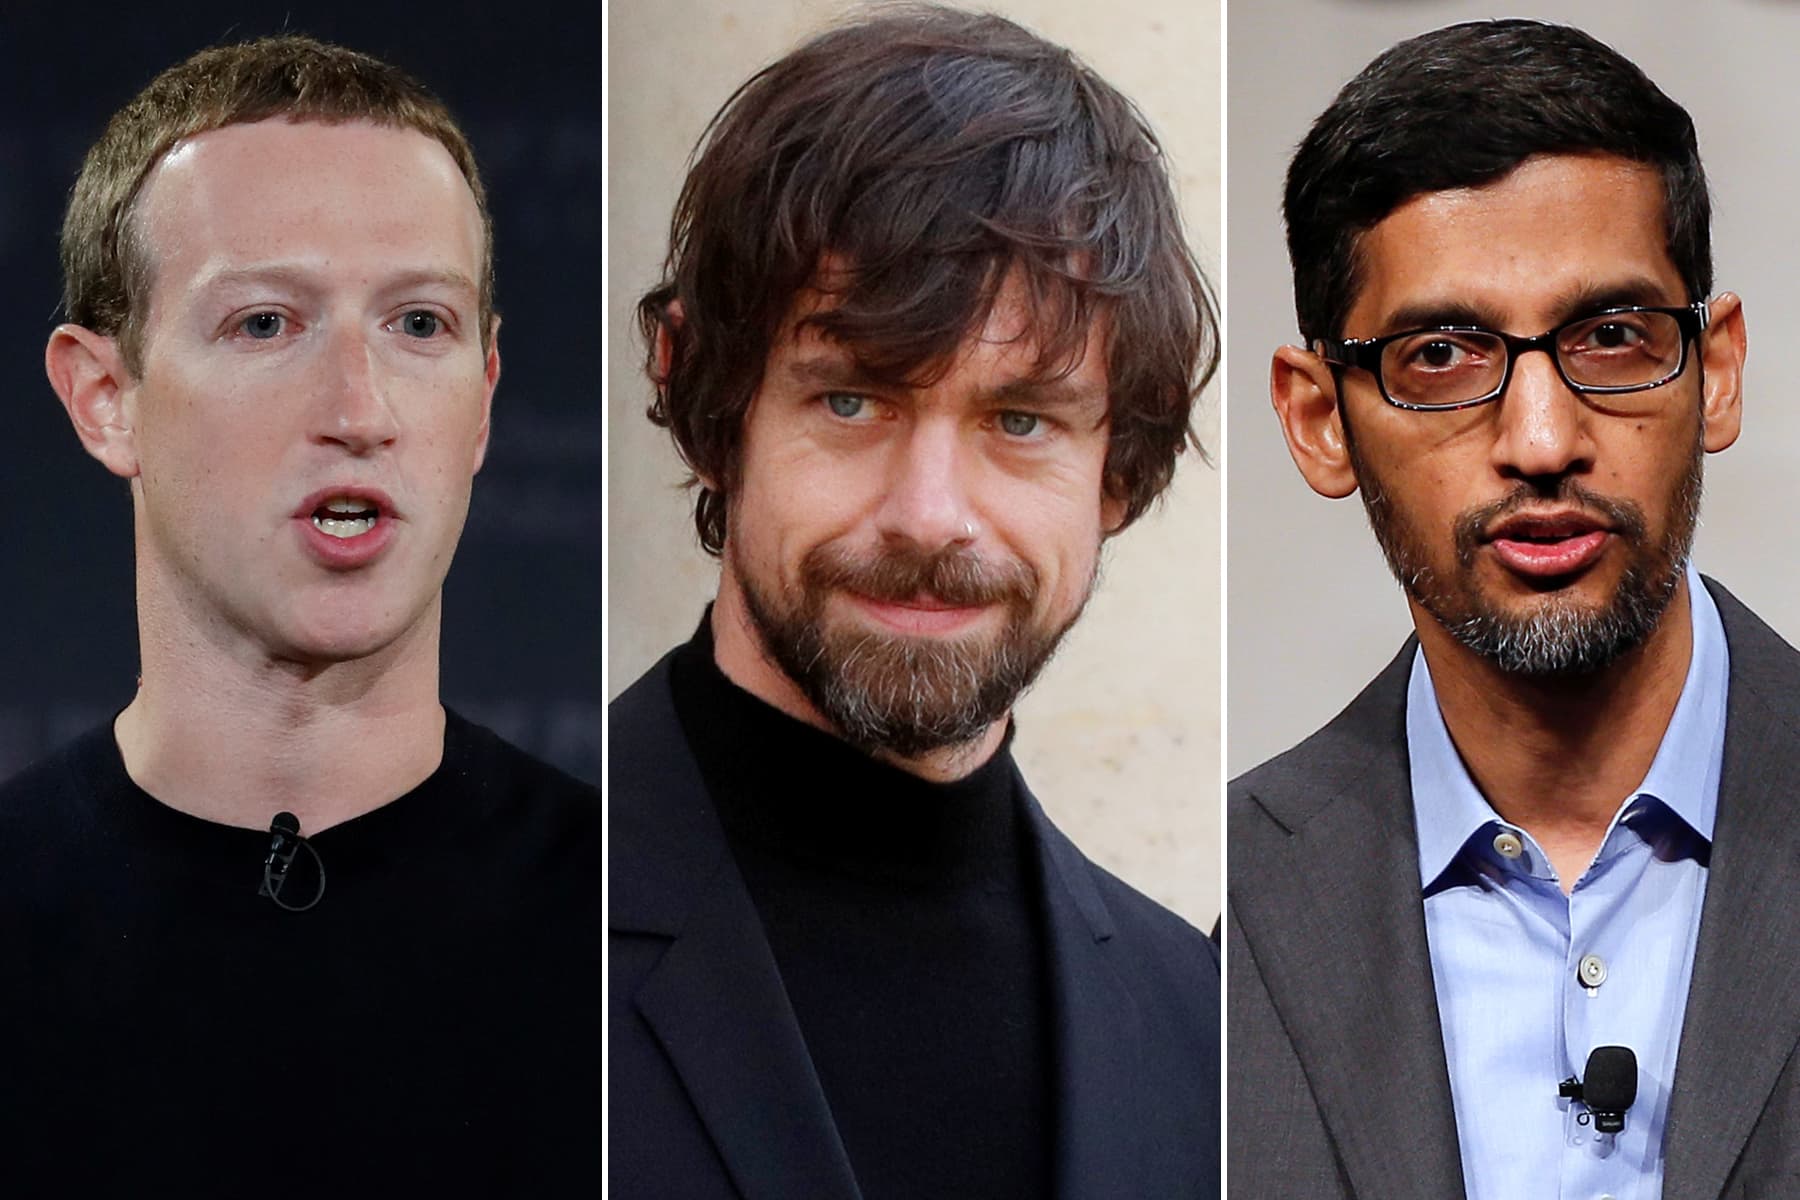 Facebook, Google and Twitter CEOs will make another appearance before Congress in March